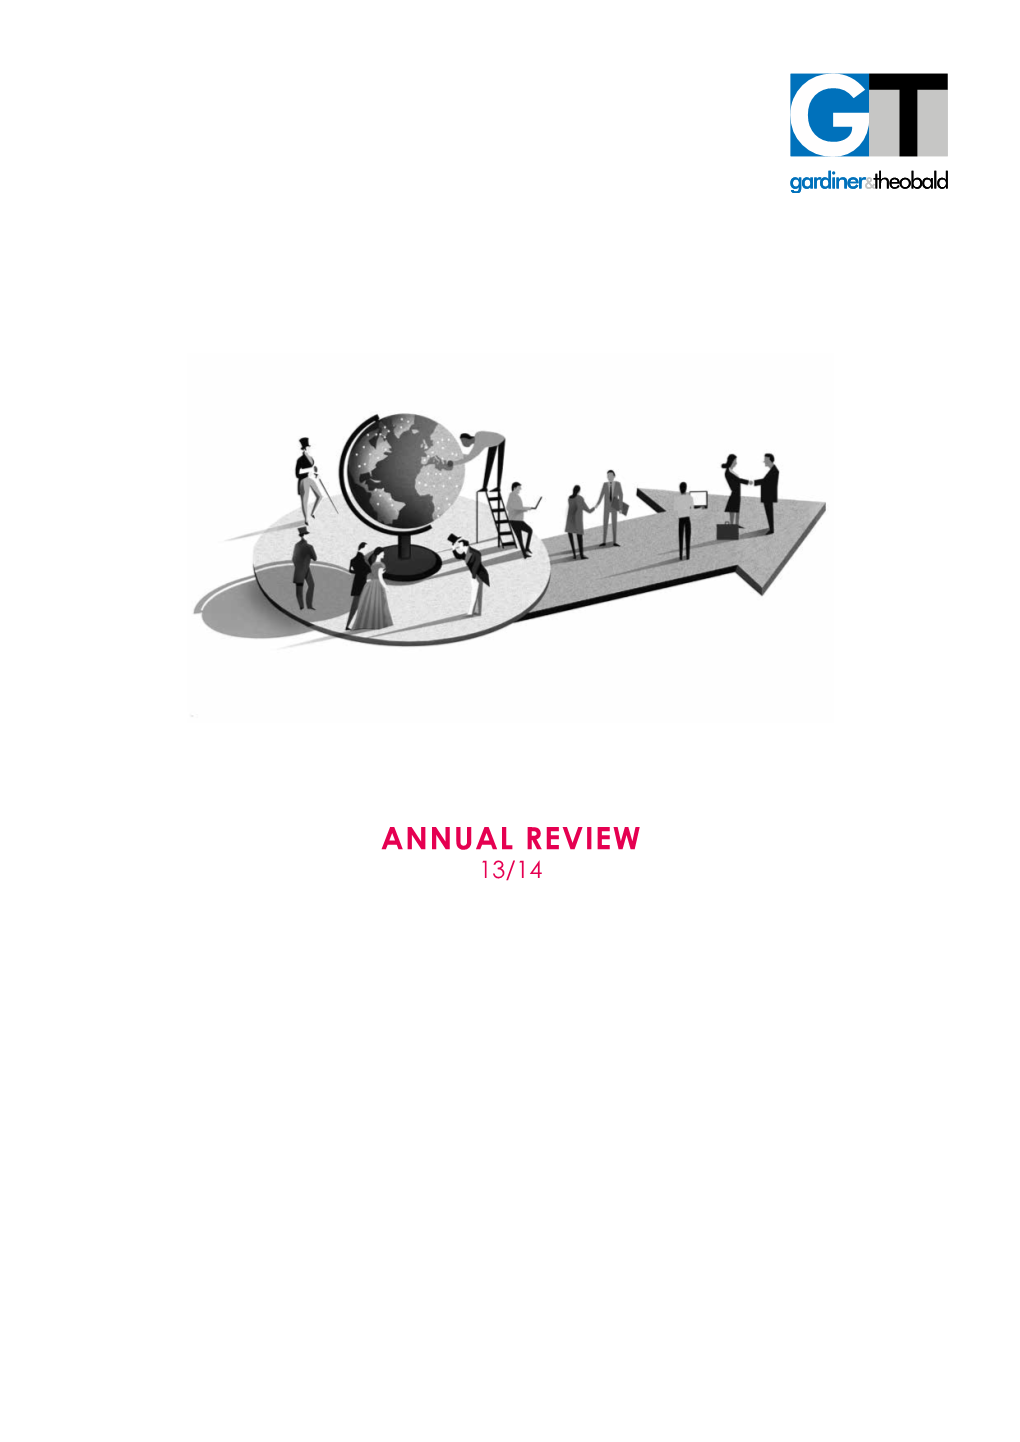 ANNUAL REVIEW 13/14 in 2015 We Mark Our 180Th Year of Independent Thinking